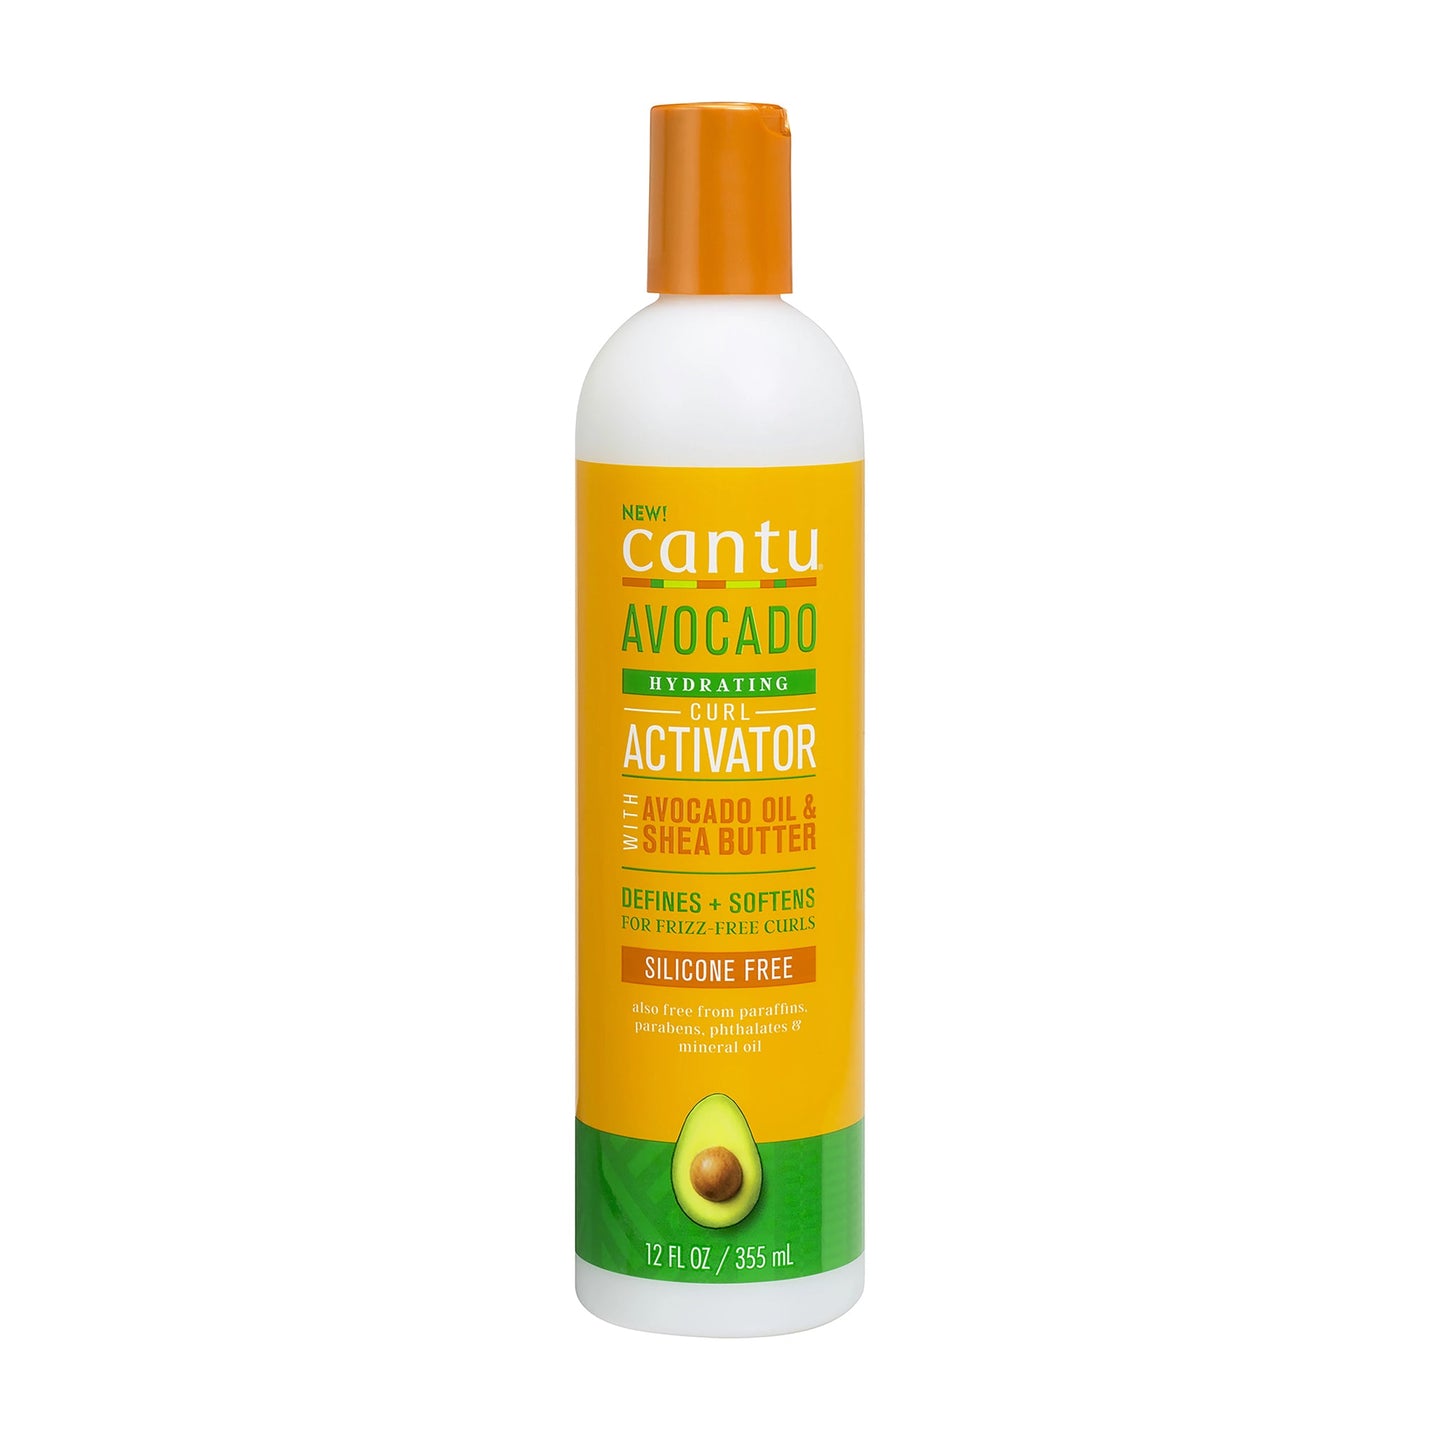 CANTU - AVOCADO HYDRATING CURL ACTIVATOR WITH AVOCADO OIL & SHEA BUTTER - 355ML